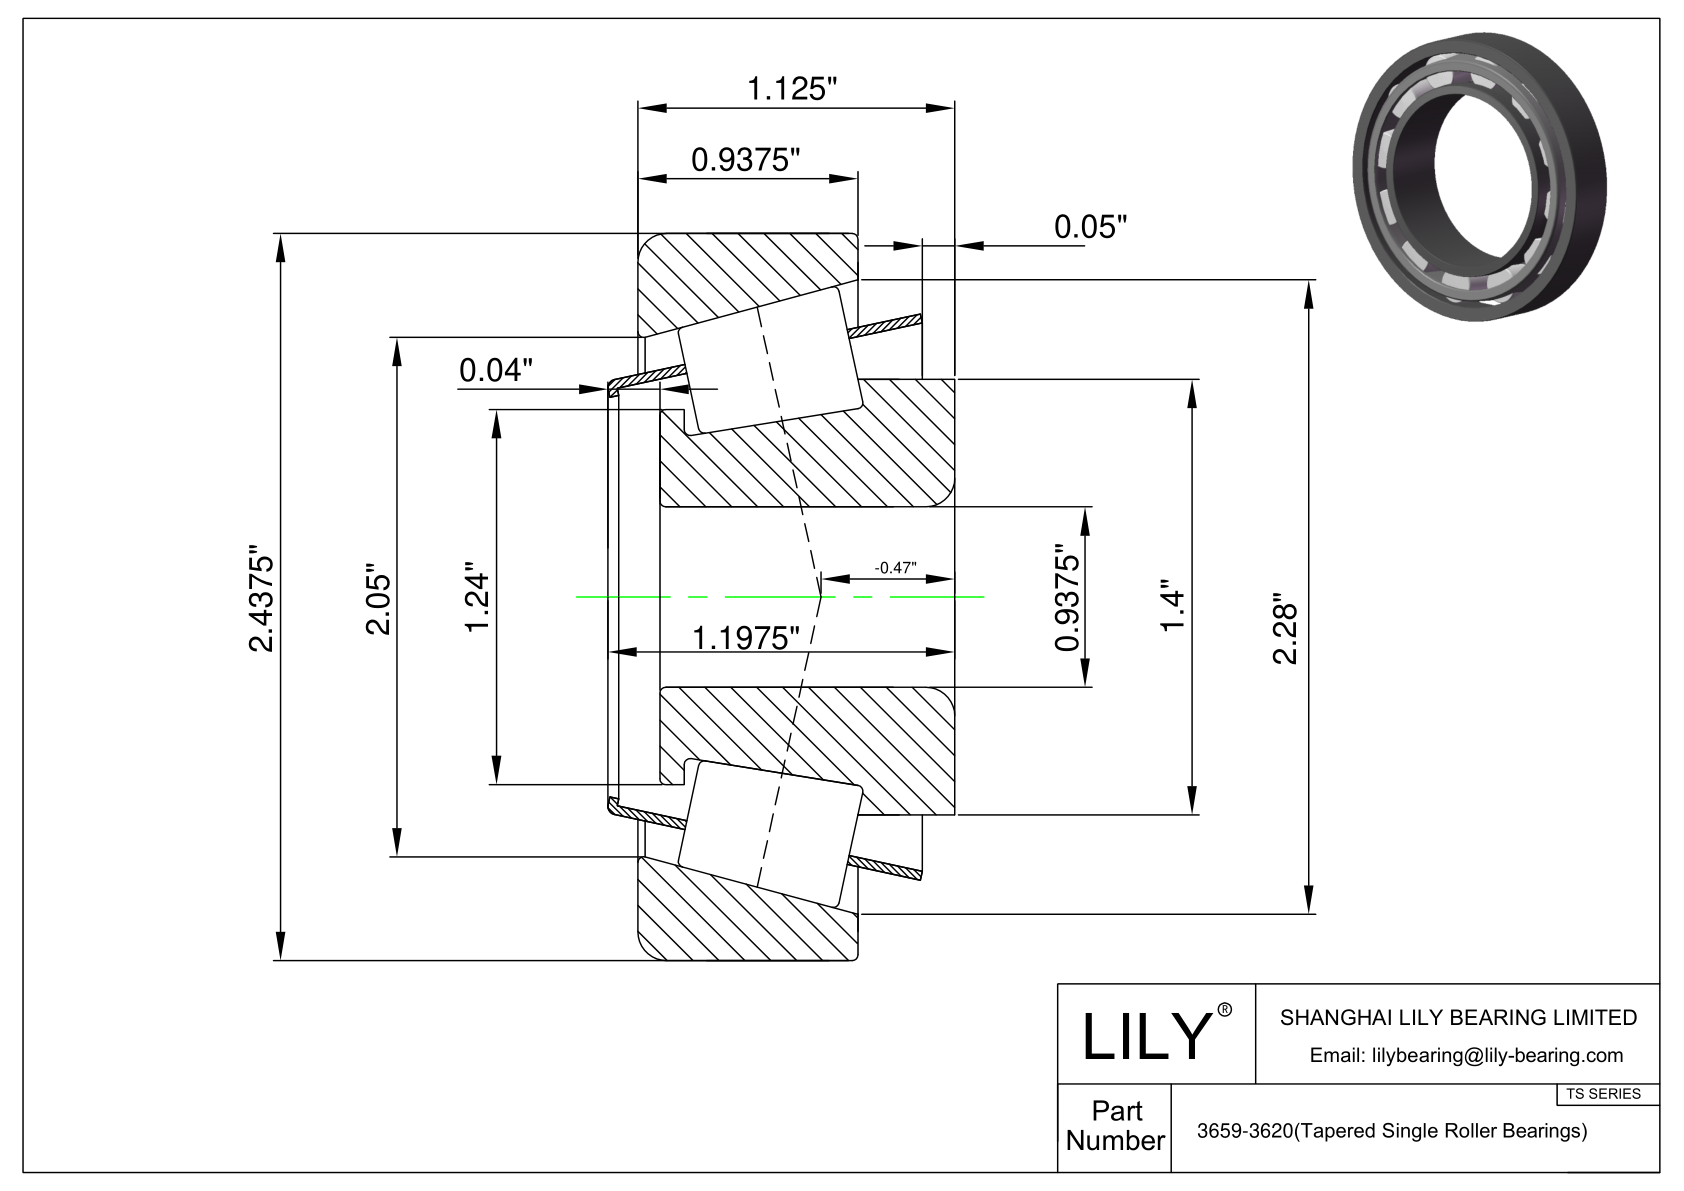 3659-3620 TS (Tapered Single Roller Bearings) (Imperial) cad drawing